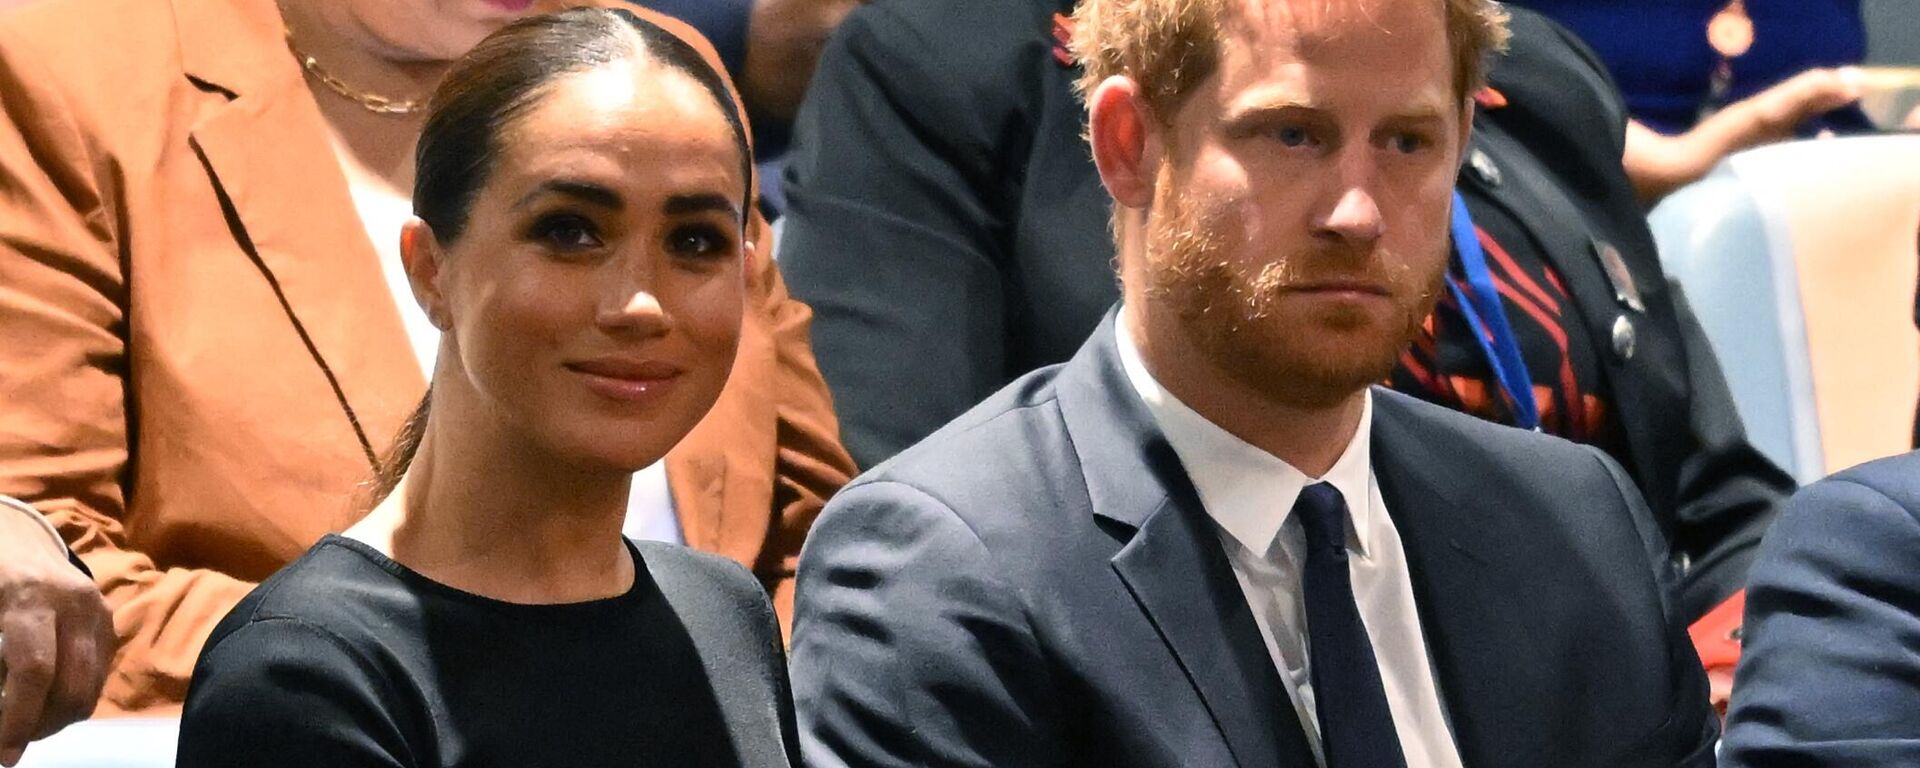 Prince Harry (R) and Meghan Markle (L), the Duke and Duchess of Sussex, attend the 2020 UN Nelson Mandela Prize award ceremony at the United Nations in New York on July 18, 2022 - Sputnik International, 1920, 17.12.2022